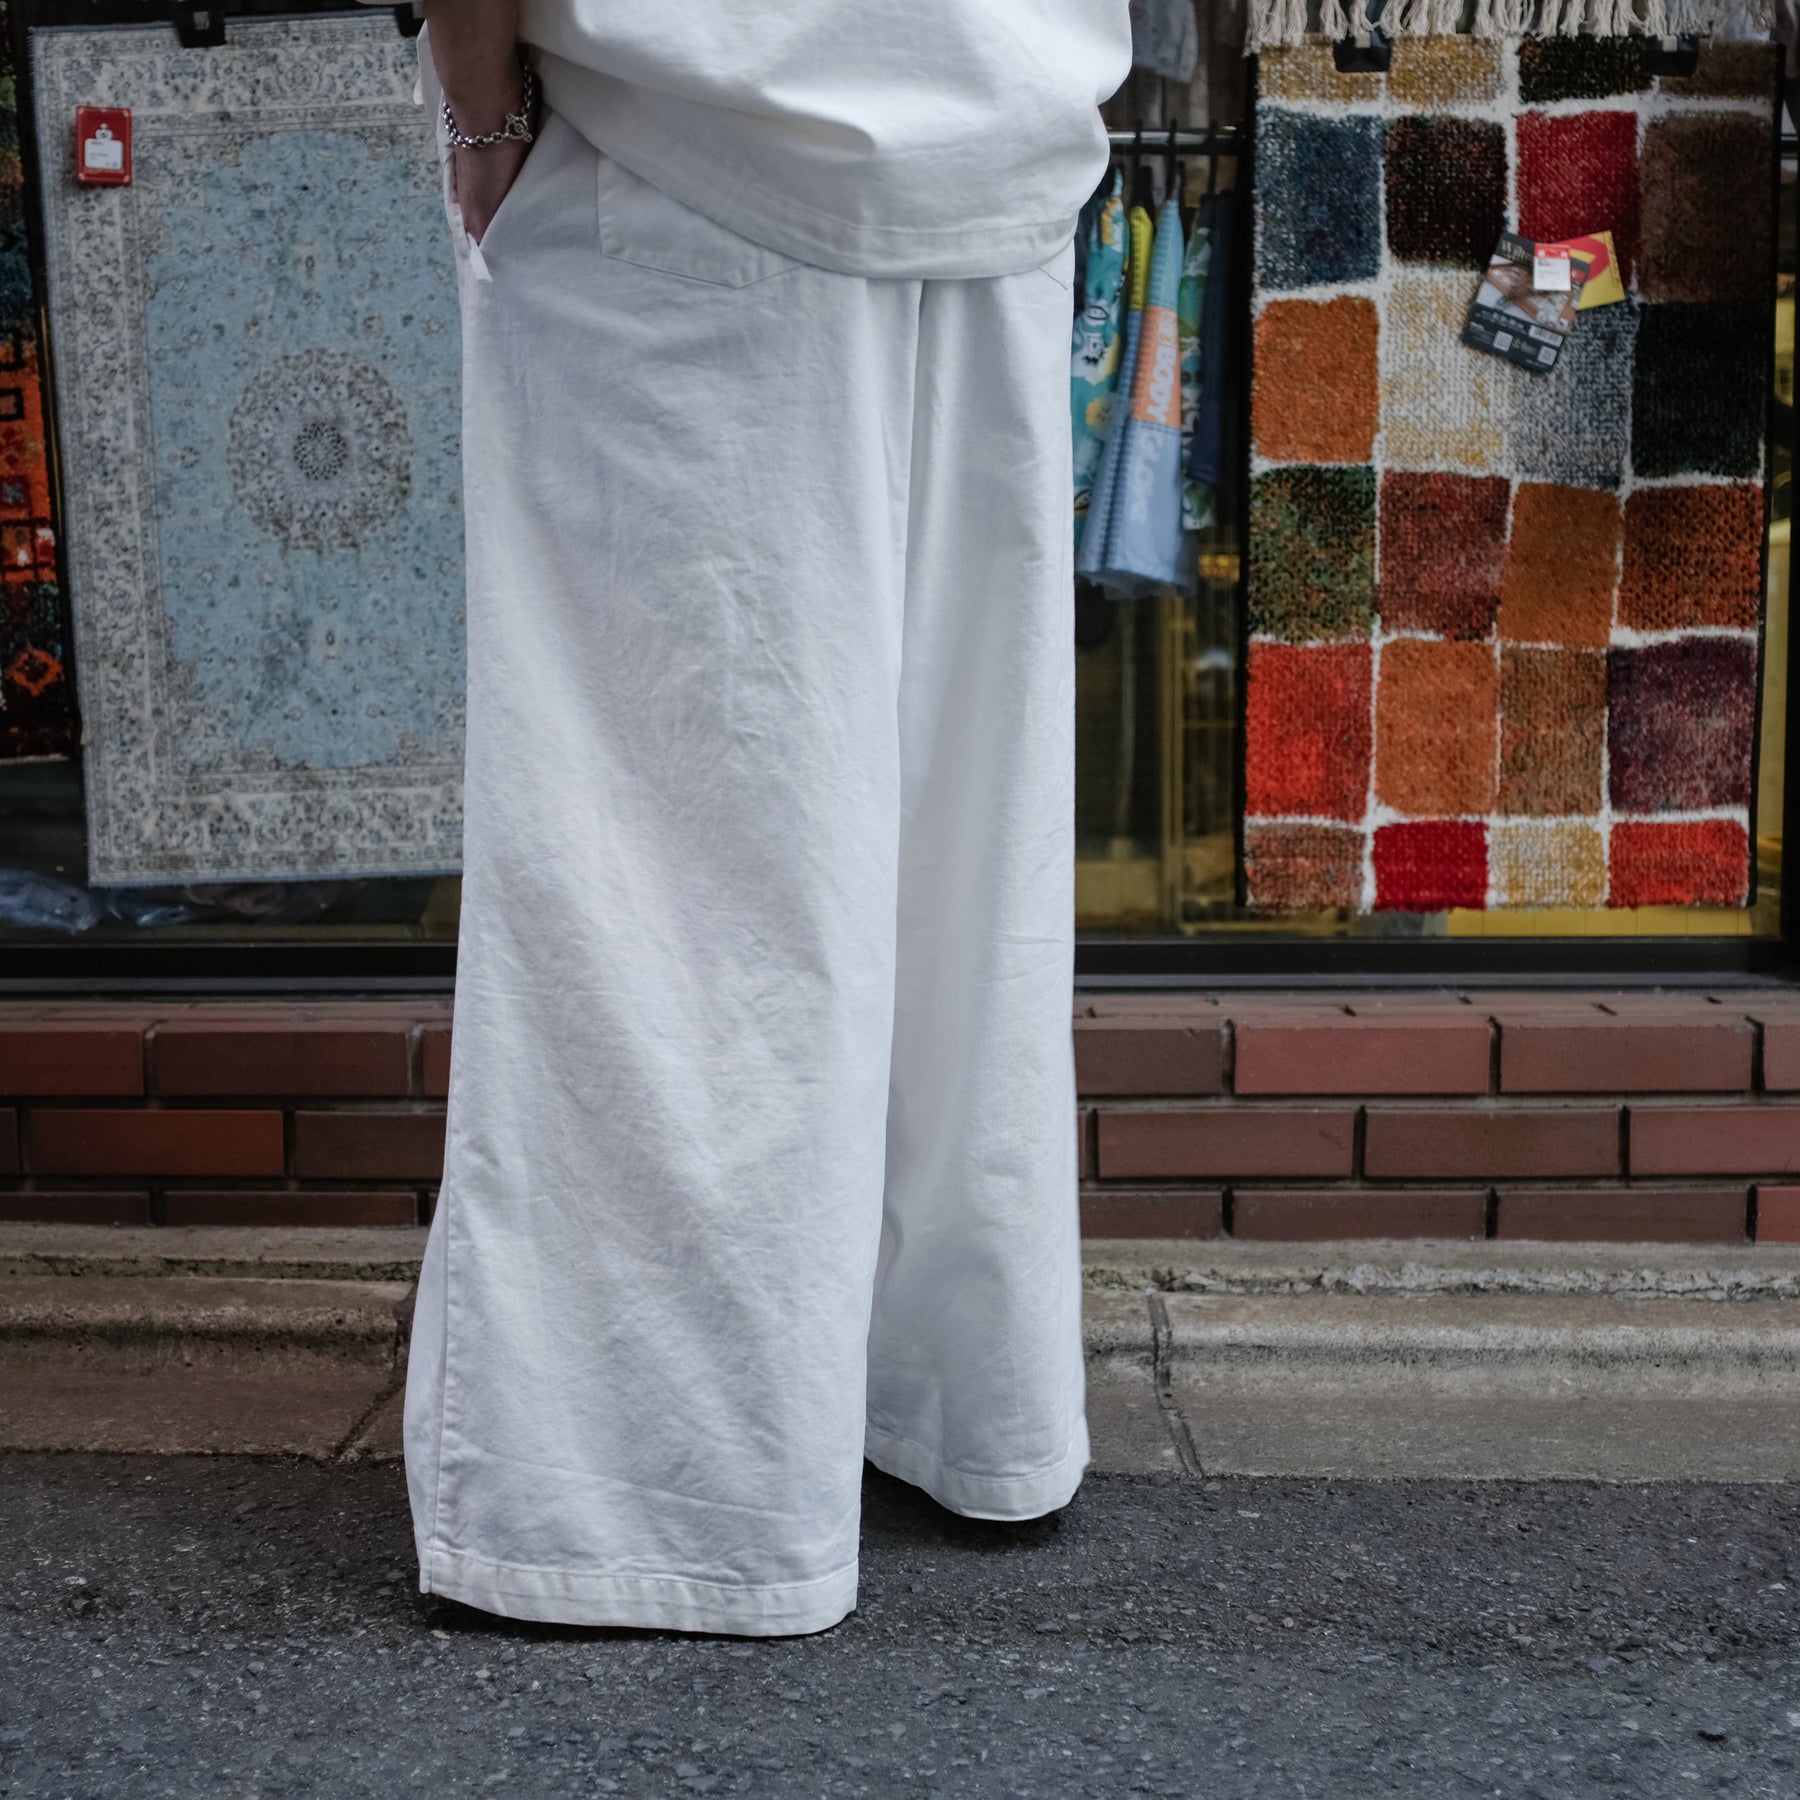 WILLY CHAVARRIA / JAIL PANTS WHITE